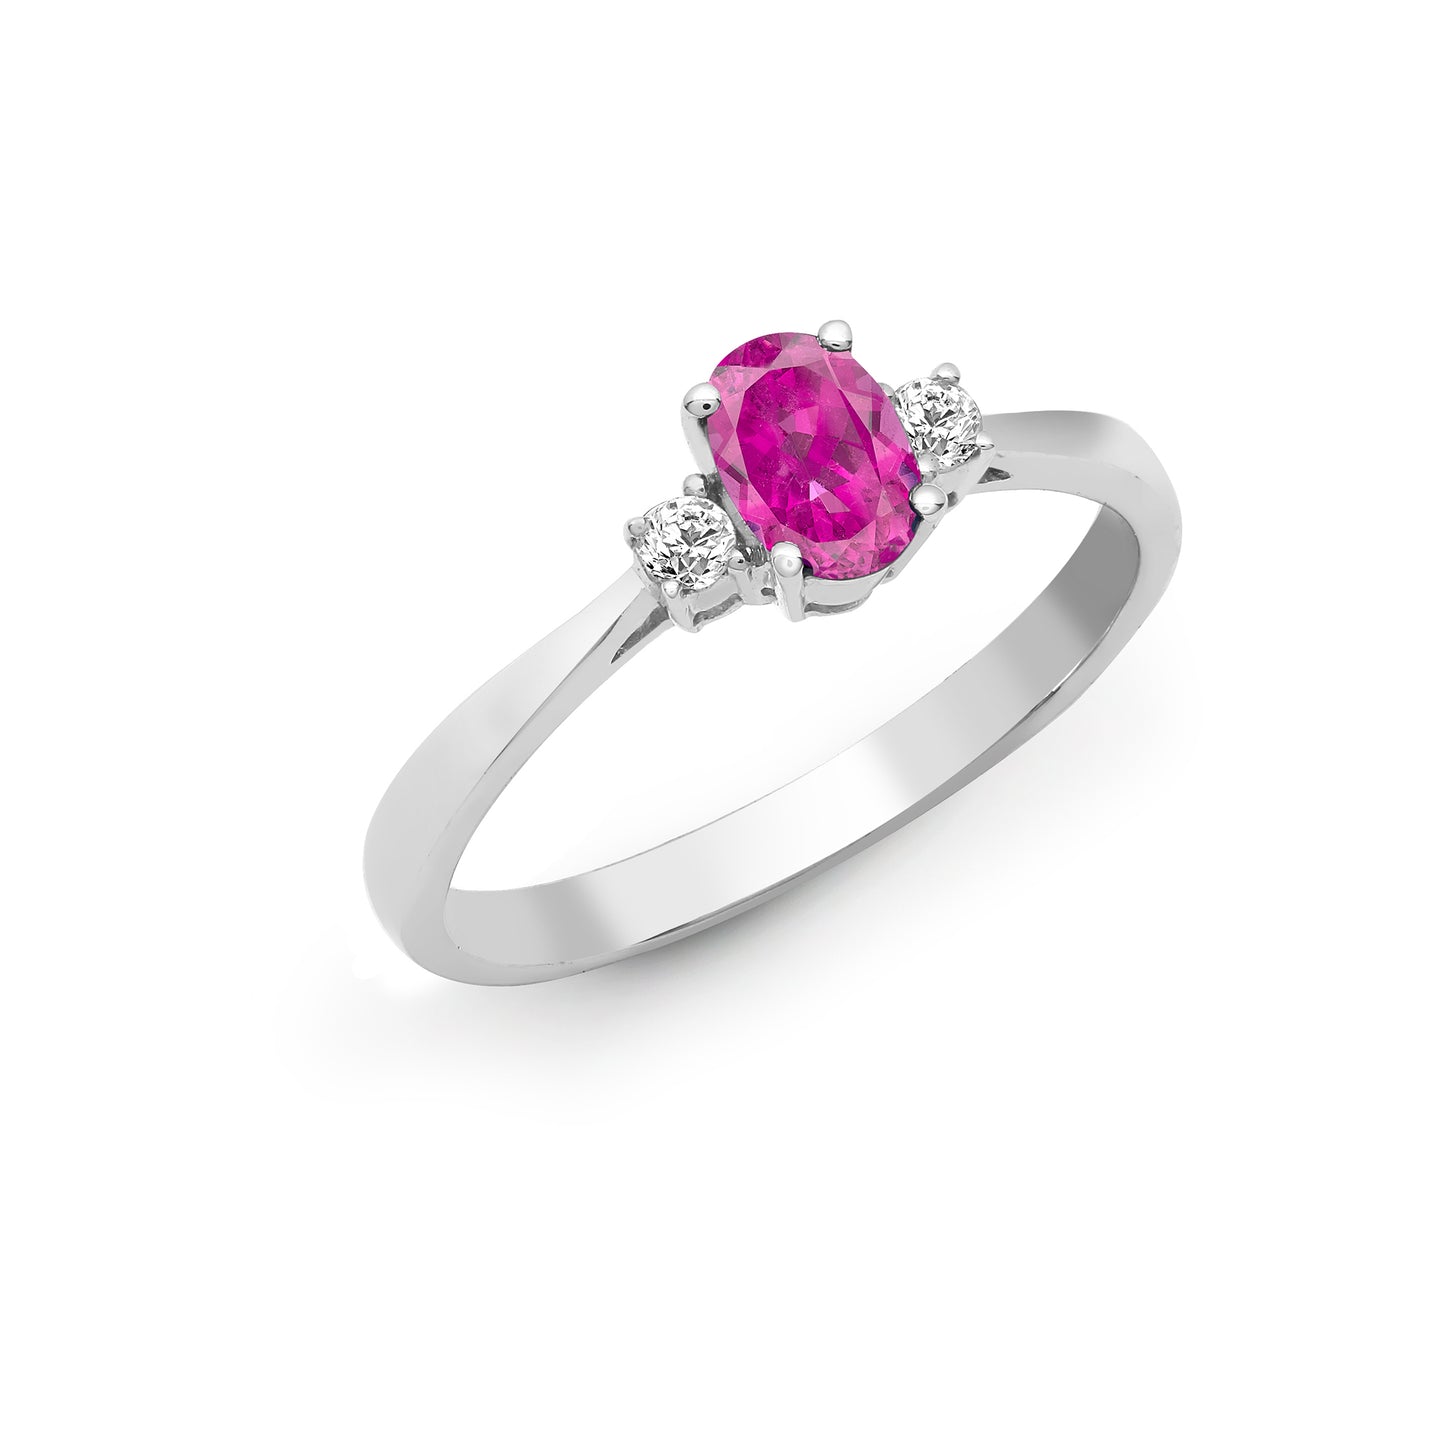 18ct White Gold  Diamond Pink Sapphire Trilogy Engagement Ring 6mm - 18R635